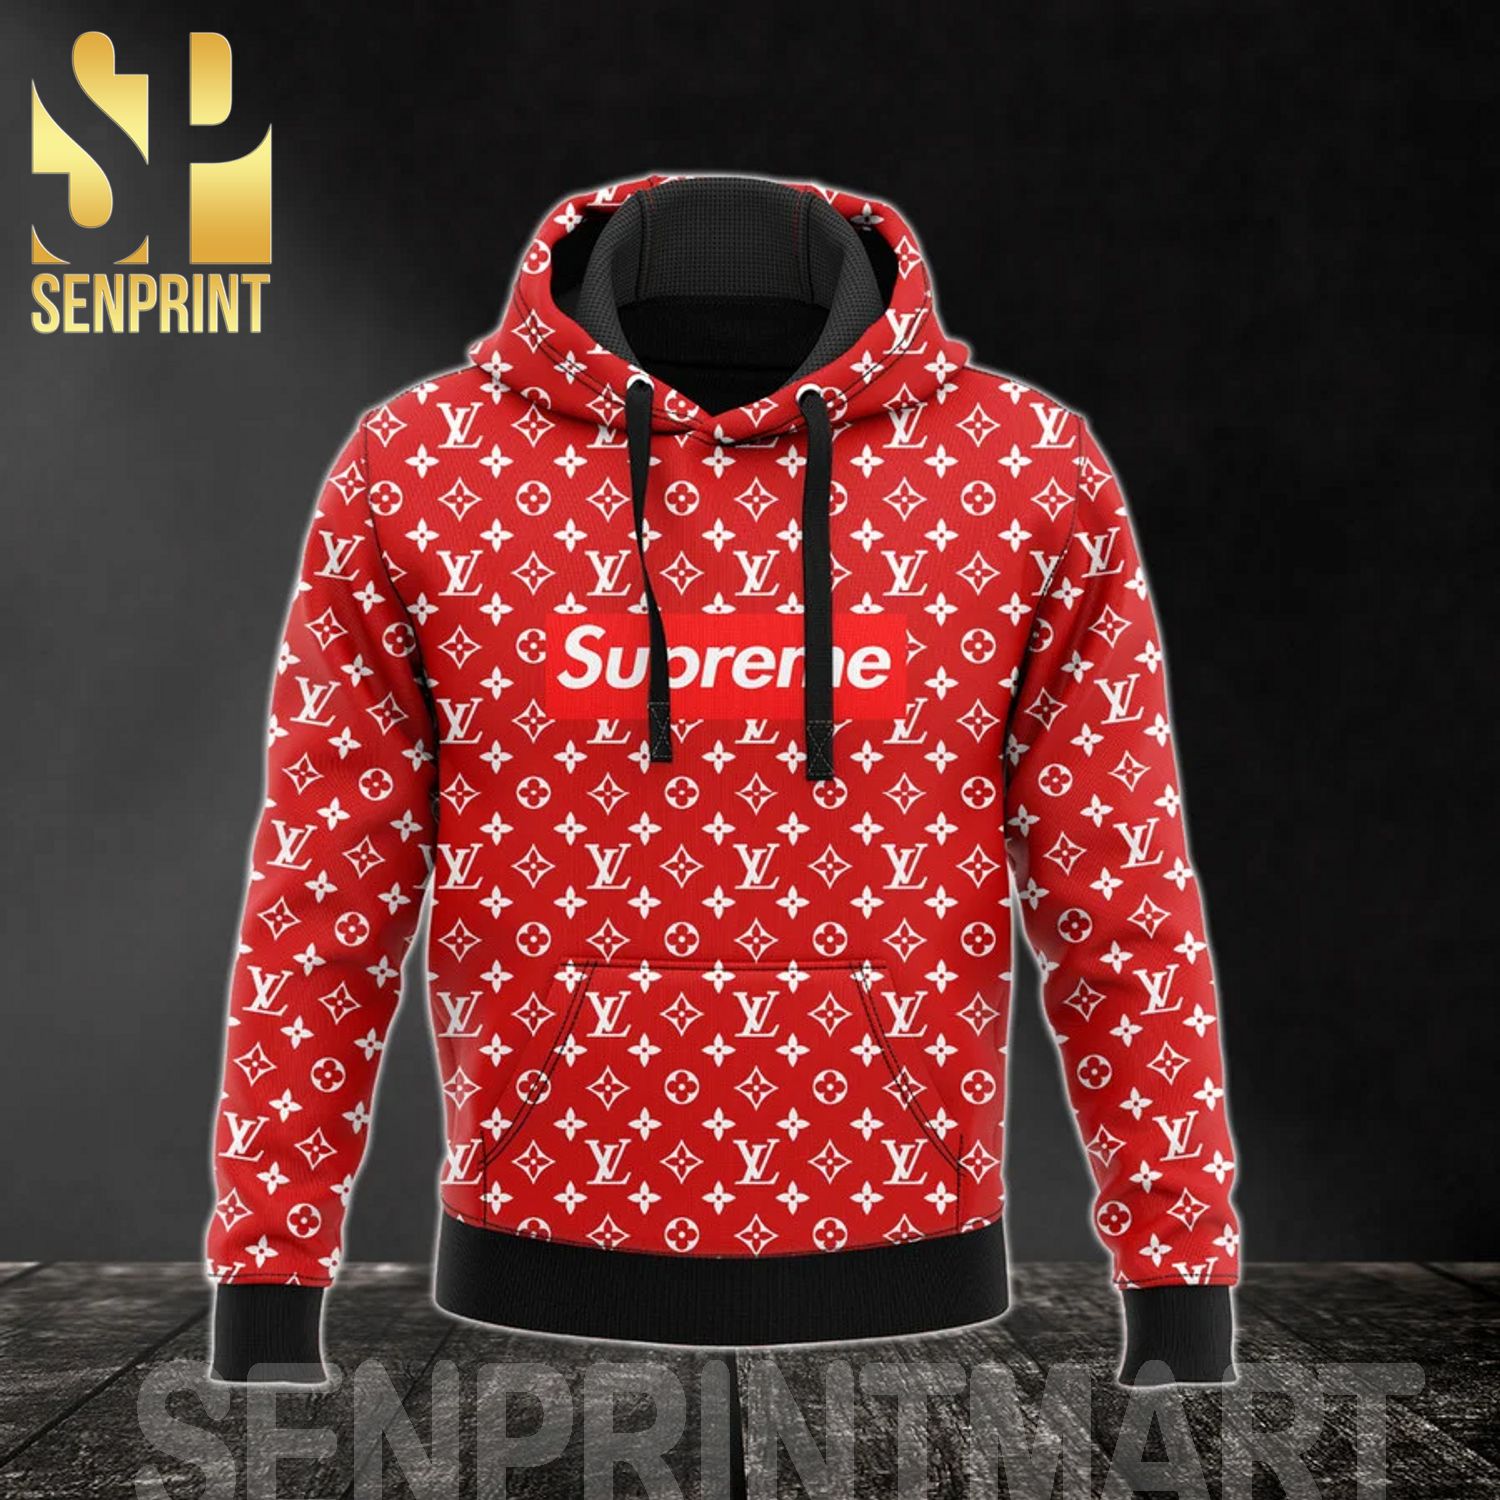 Louis Vuitton Supreme Logo White Red TShirt Luxury Brand Outfit For Men  Women  The most reputable clothing and home decor store